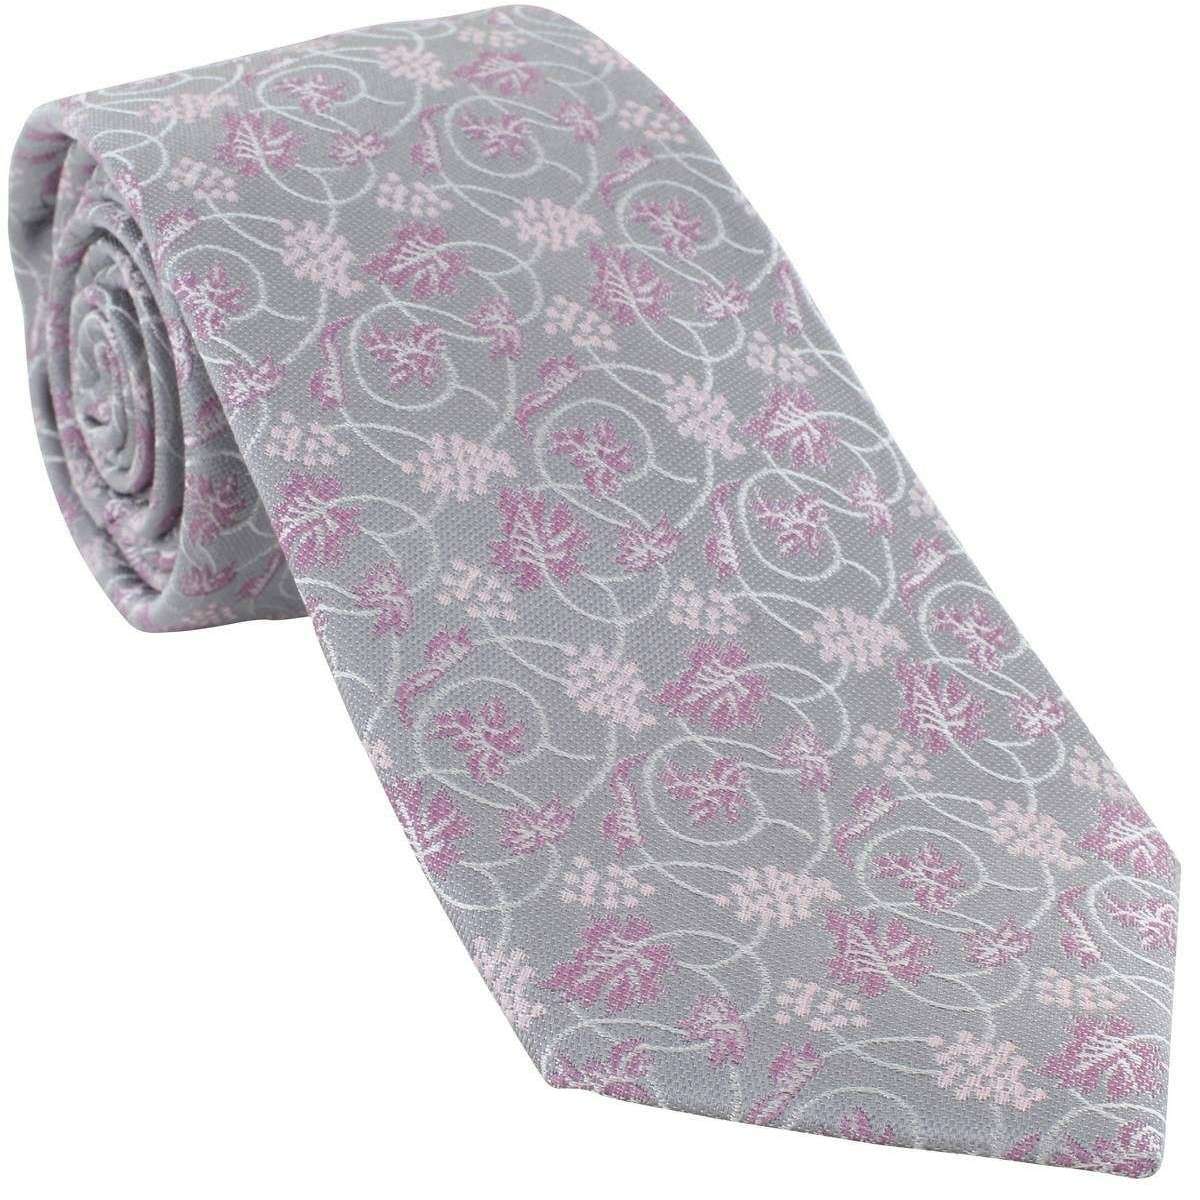 Michelsons of London Trailing Vine Floral Silk Tie - Silver/Pink